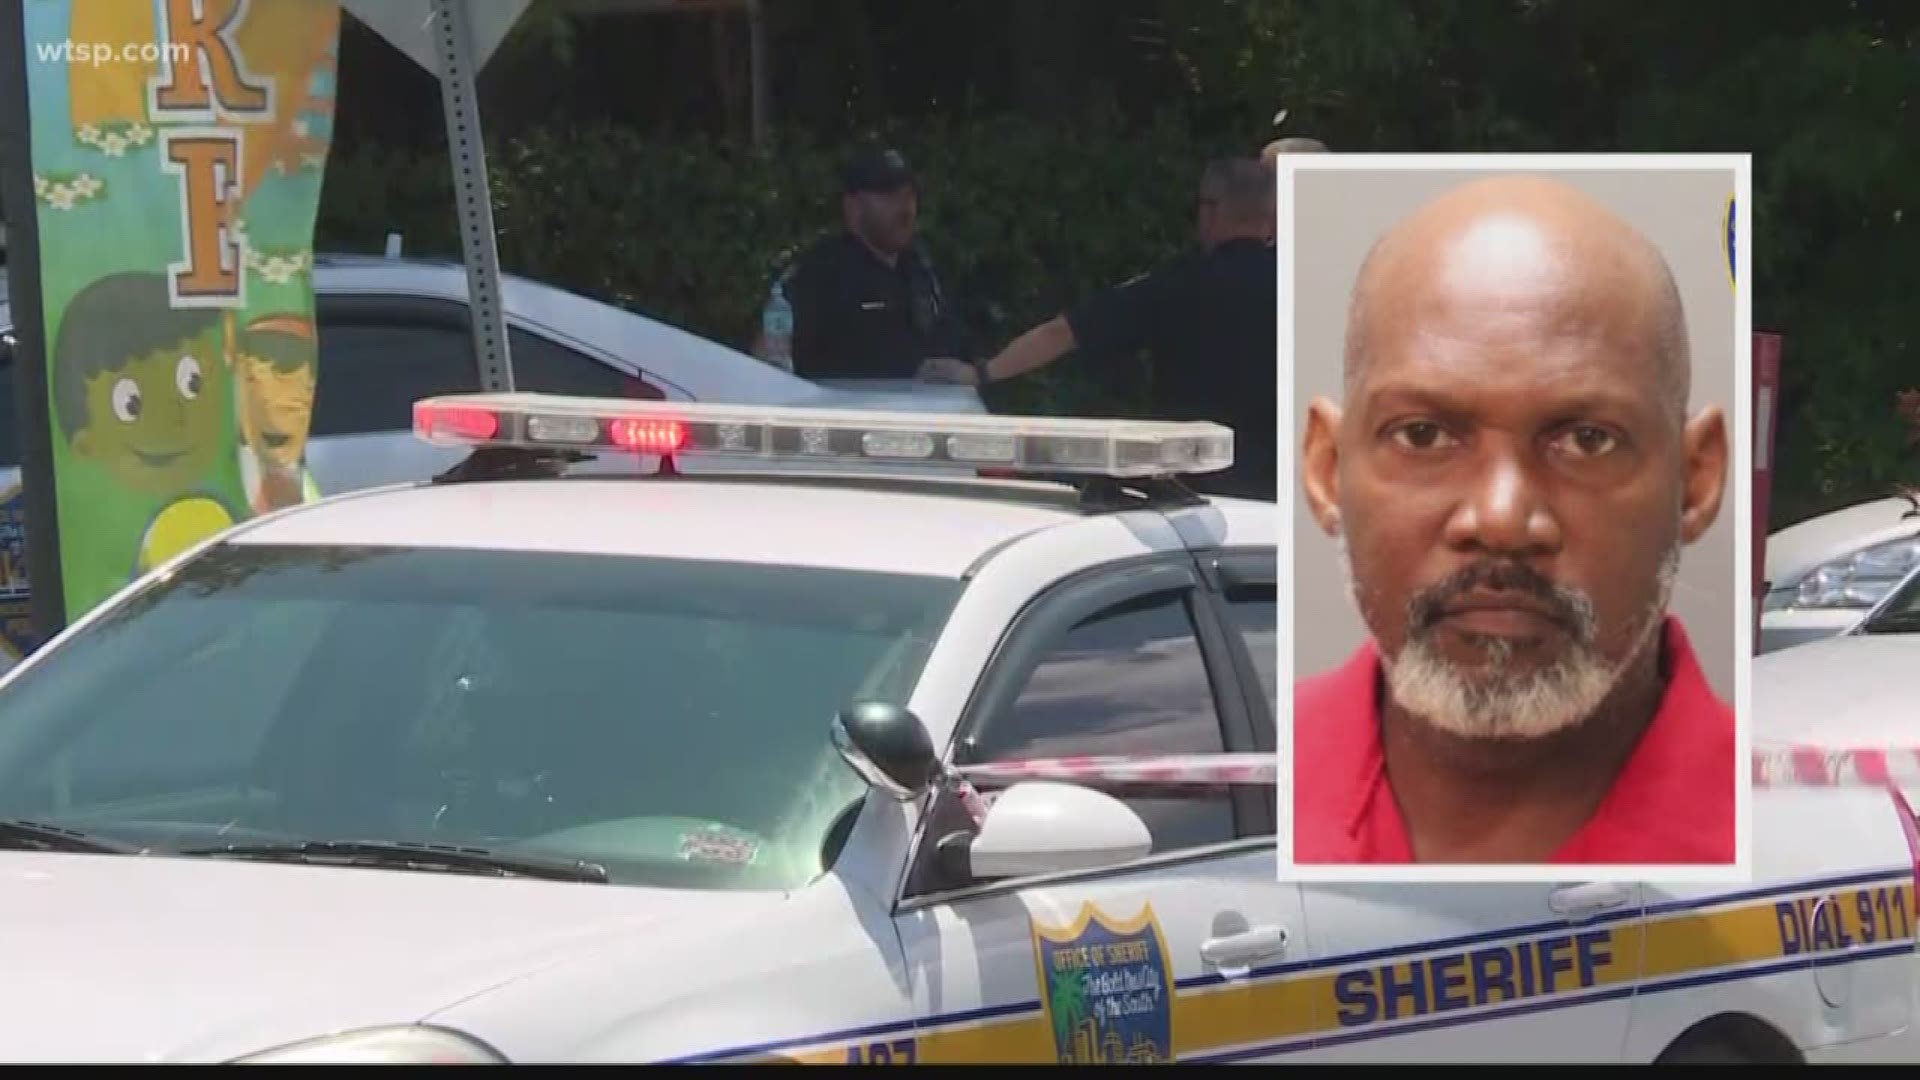 The Jacksonville Sheriff's Office has arrested the director of a daycare and charged him with child neglect after an infant was found dead in a van Wednesday afternoon. https://on.wtsp.com/2QfRnBh